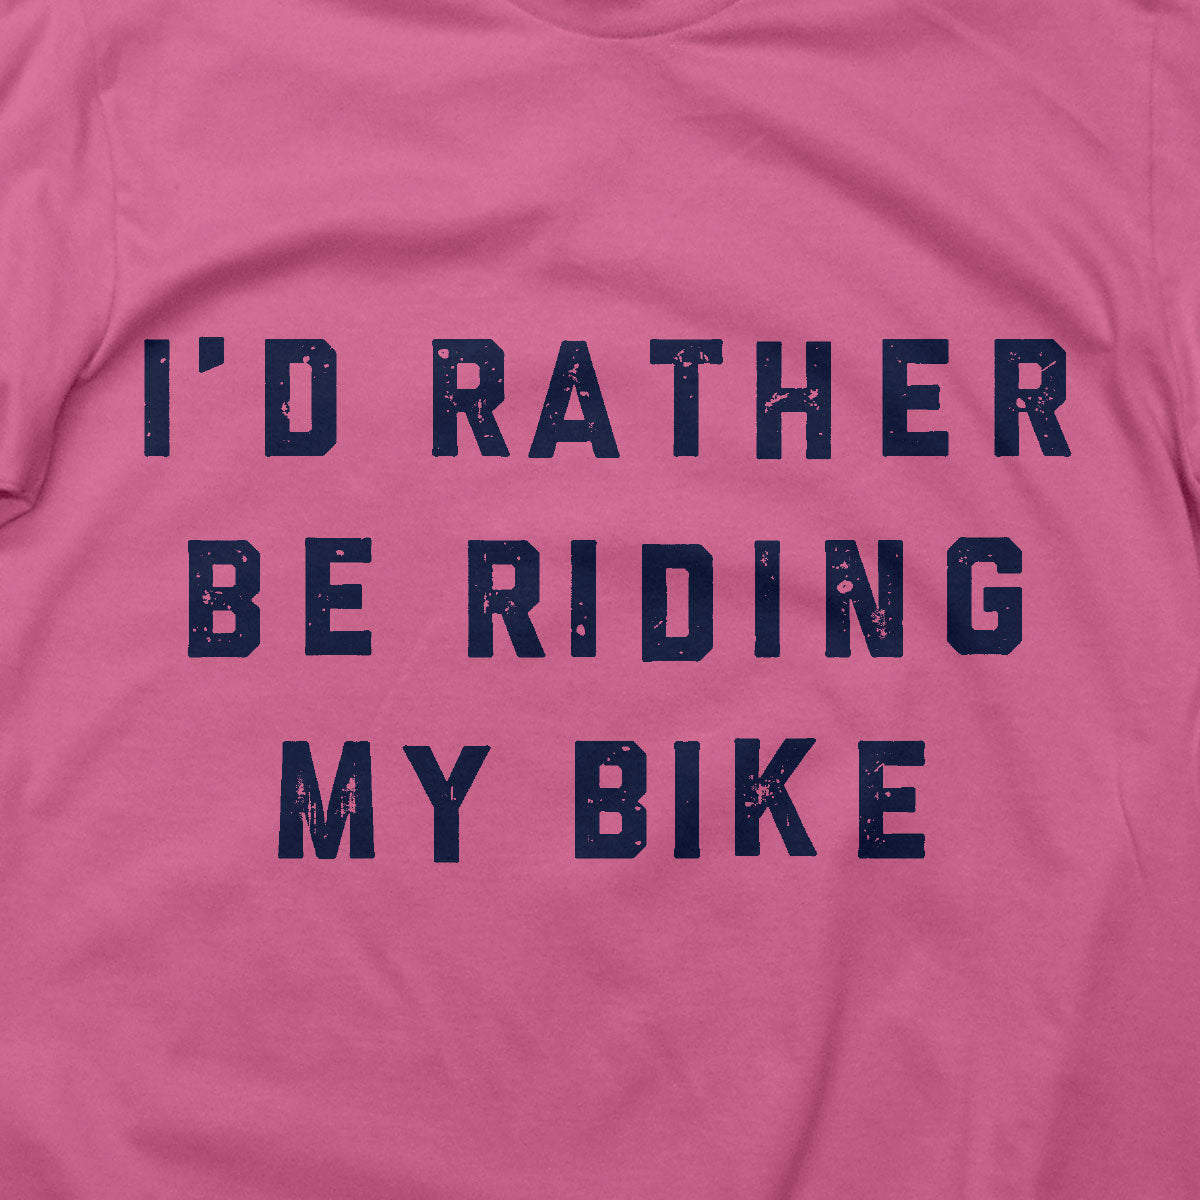 Rather Be Riding T (W) (PINK)